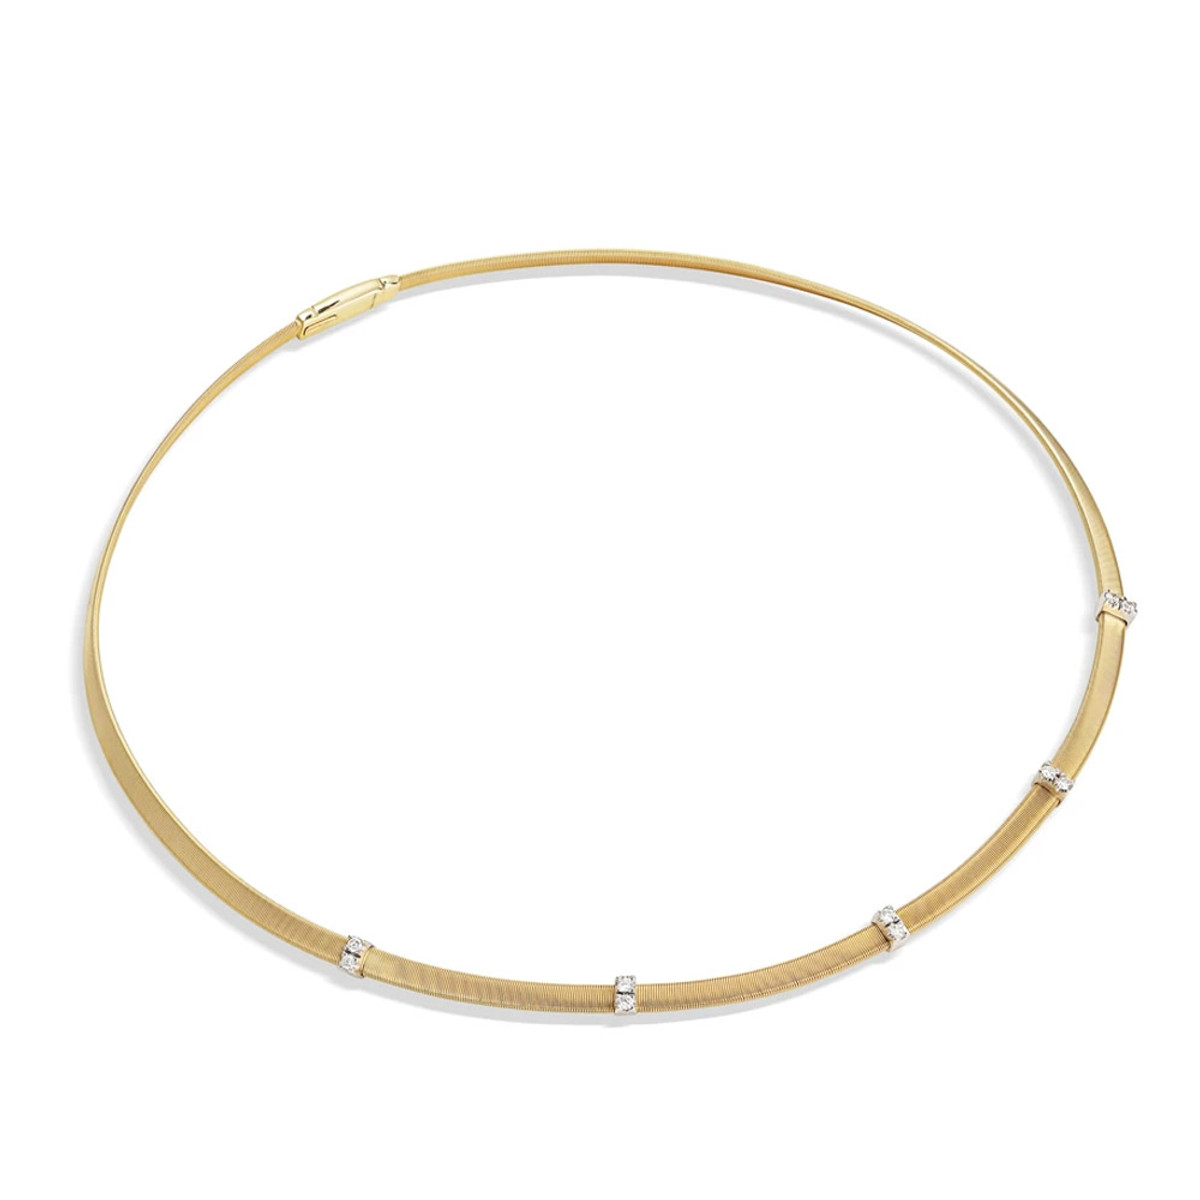 Marco Bicego 18K Yellow Gold Masai Diamond Five Station Necklace-30061 Product Image